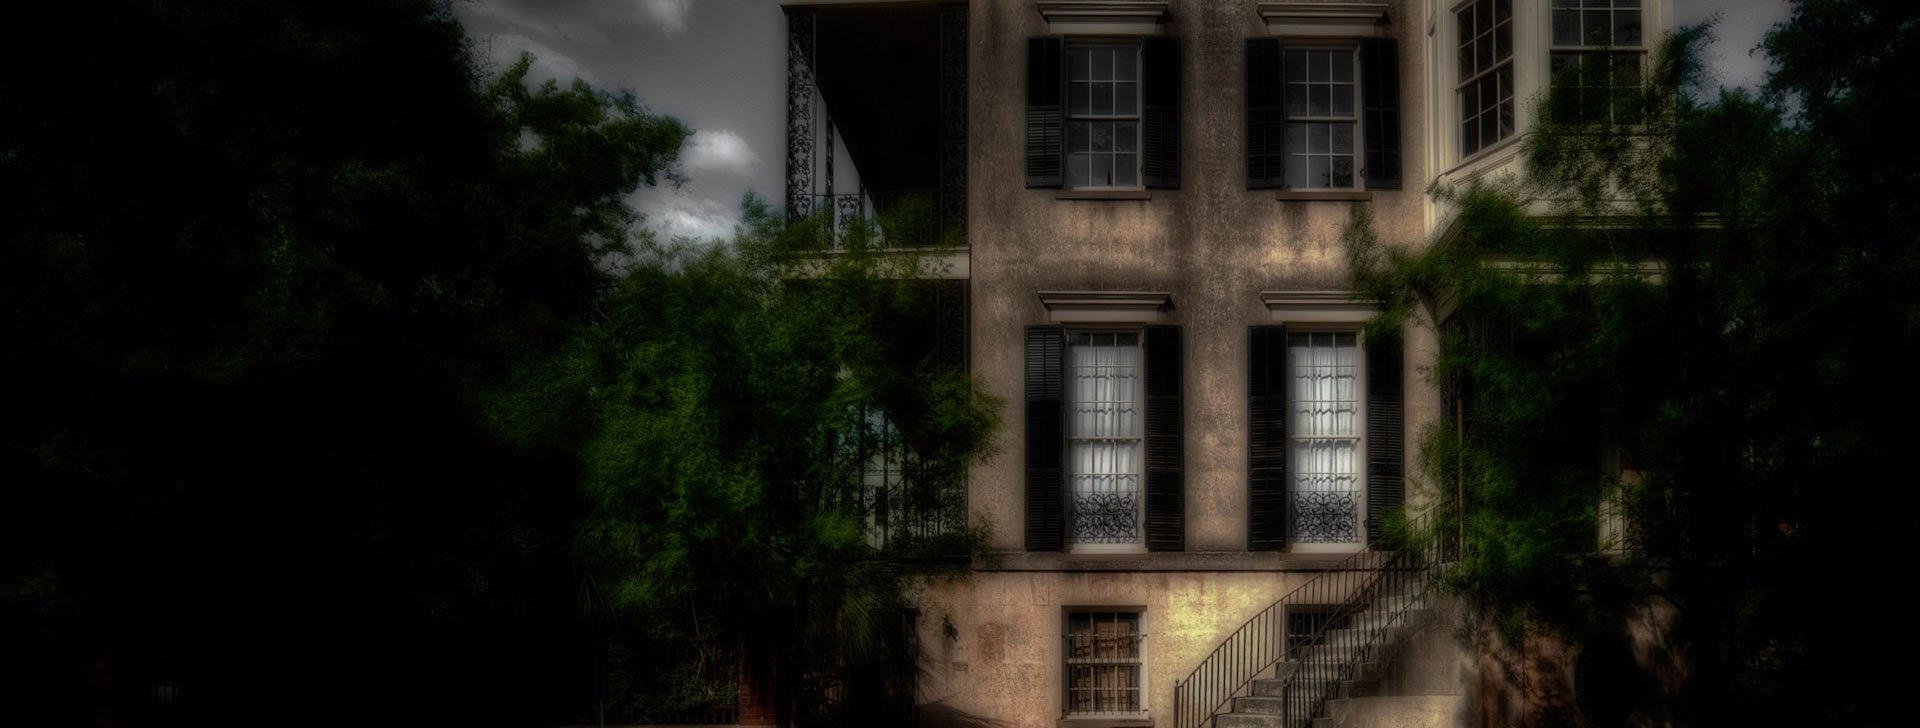 The house at 432 Abercorn, rumored to be haunted, and featured on this Ghost Tour